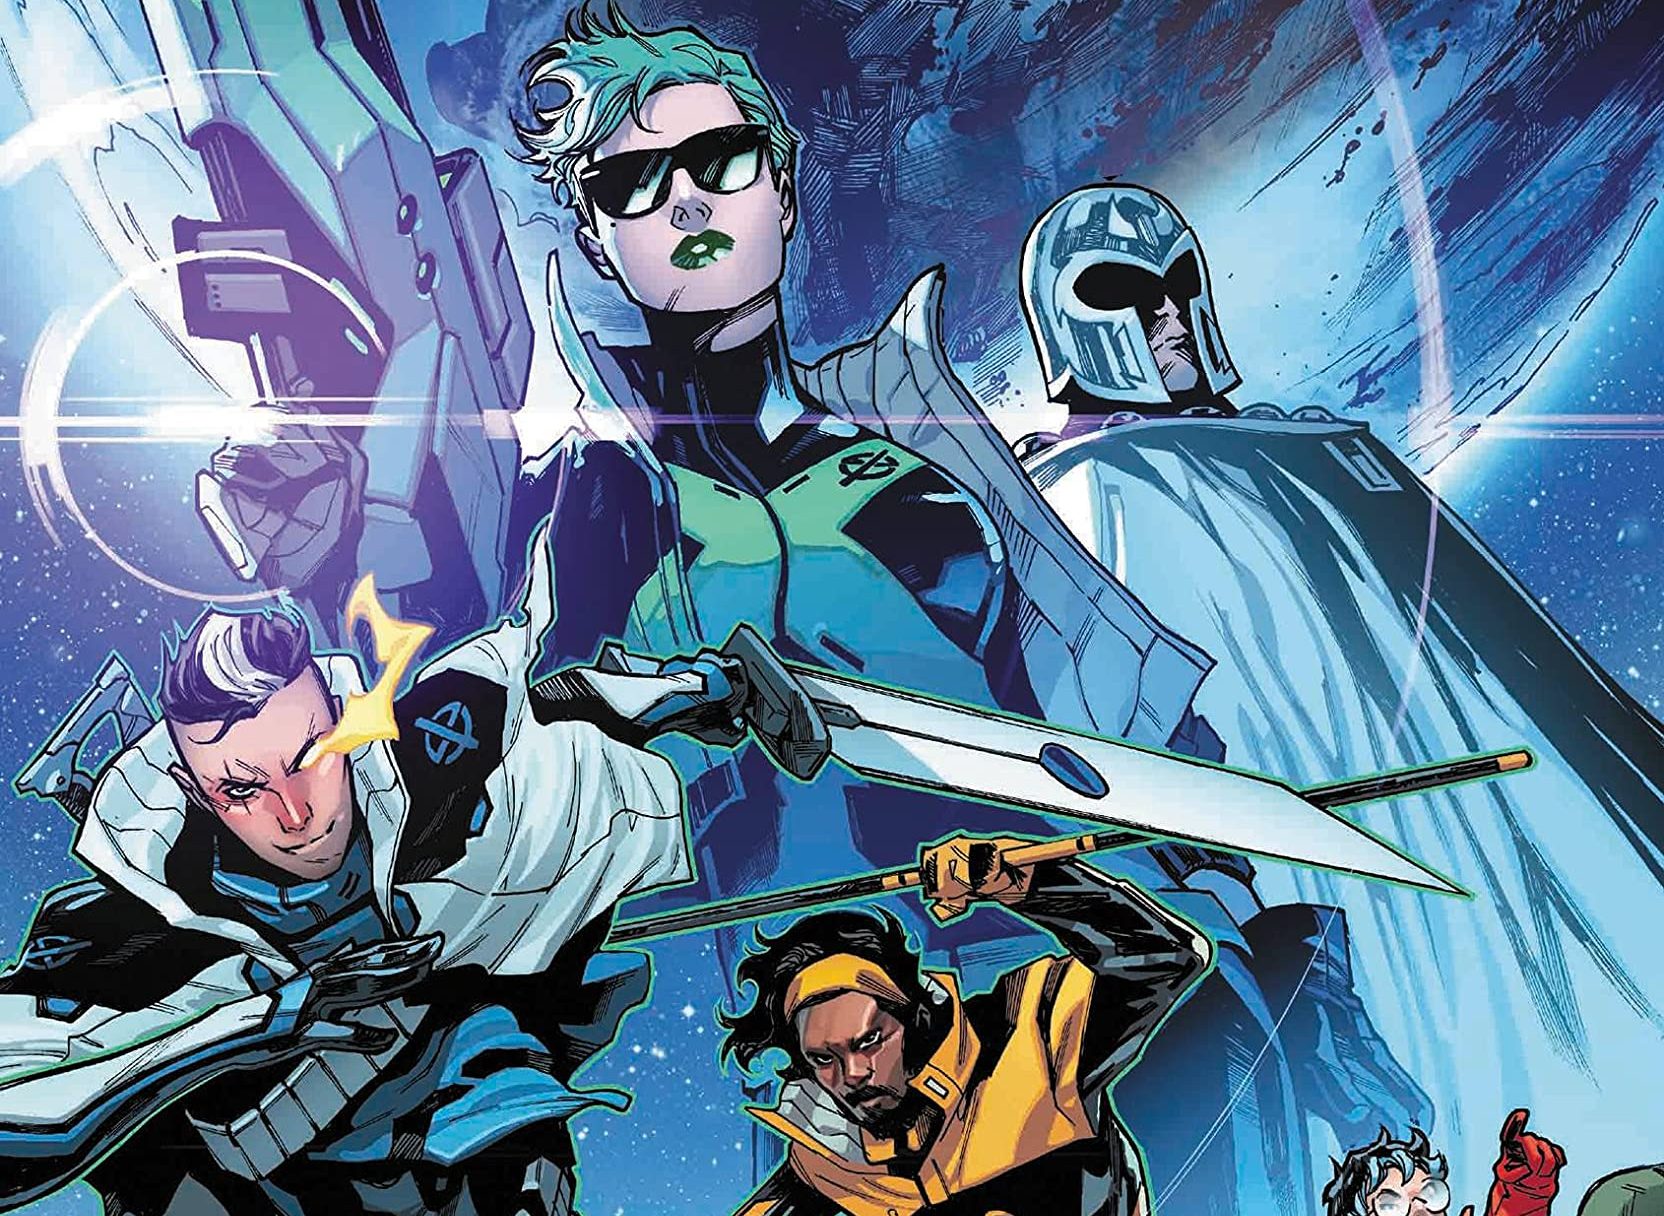 'S.W.O.R.D. by Al Ewing' Vol. 1 is the best X-book since 'House of X/Powers of X'